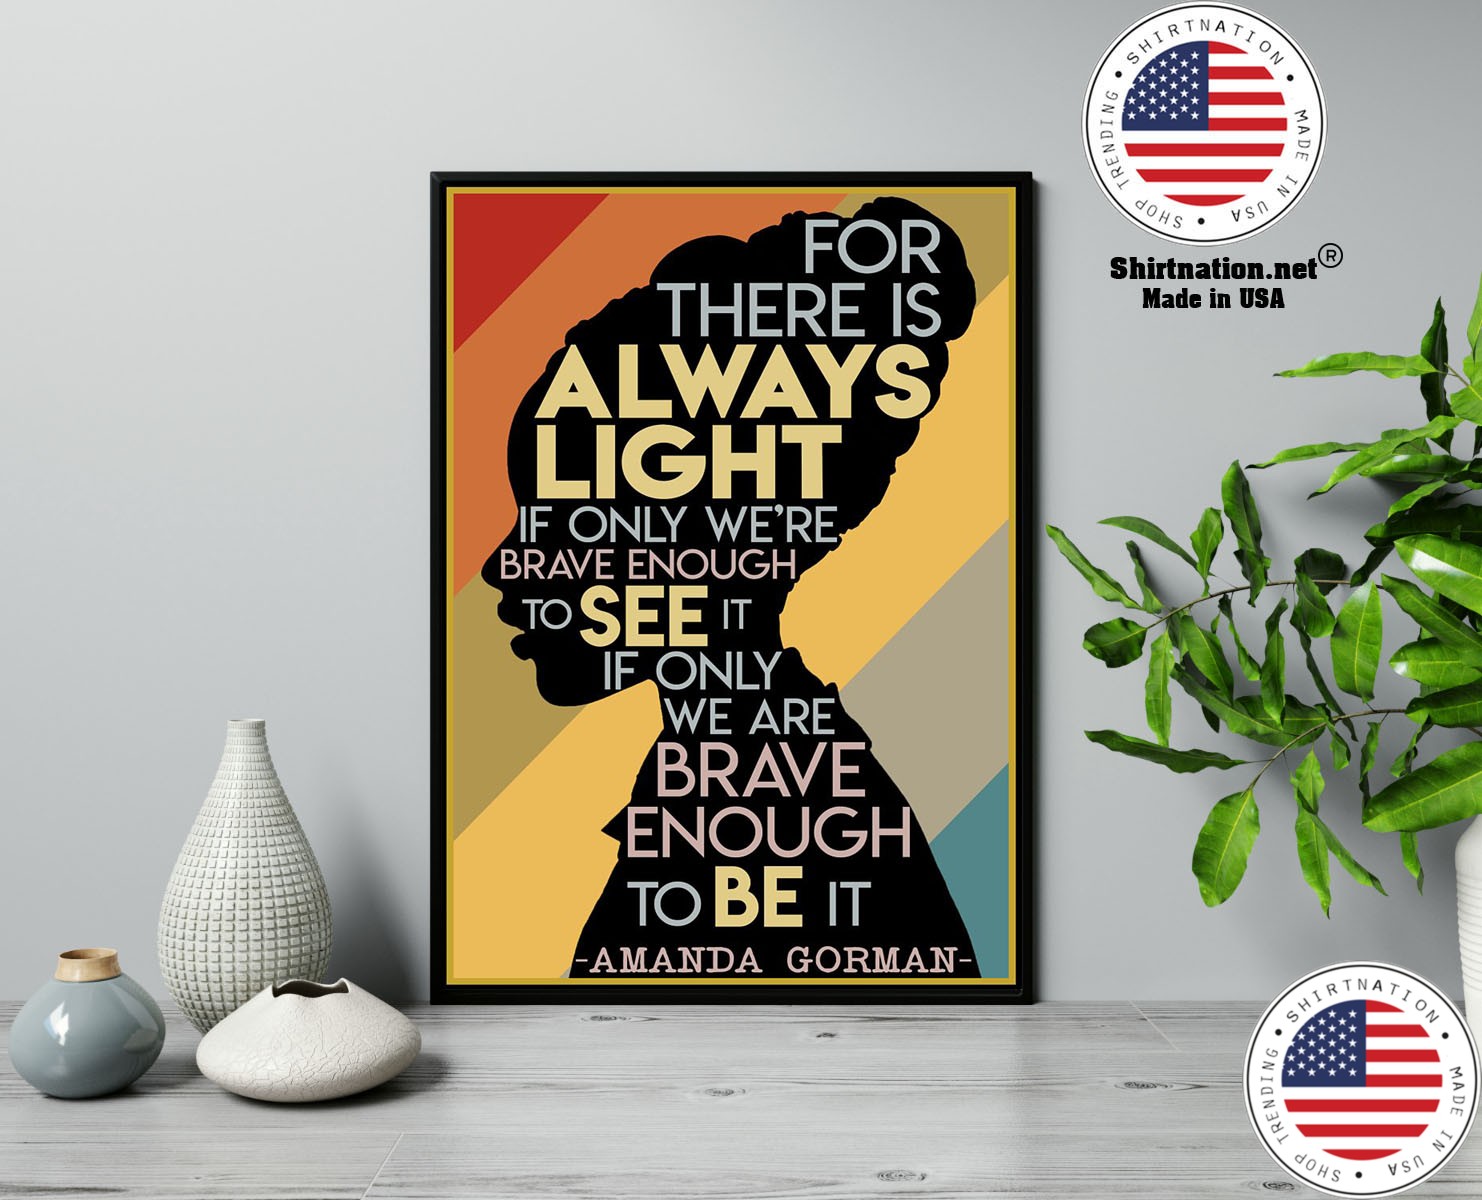 Amanda Gorman Hill we climb for there is always light poster 13